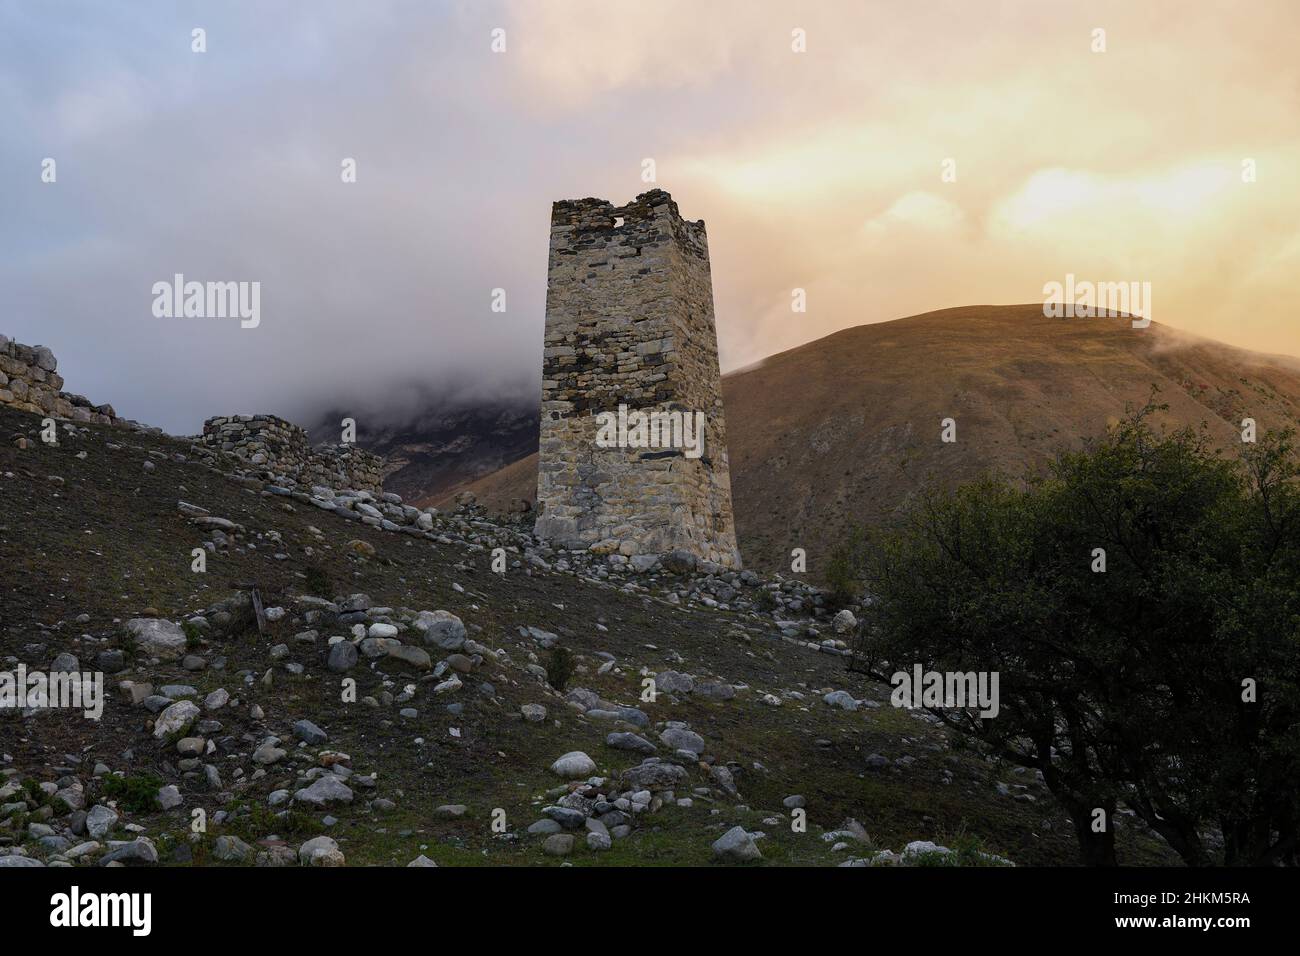 A old Ossetian battle tower against the background of sunset in foggy mountains. Verhniy Fiagdon. Northern Ossetia, Russia Stock Photo